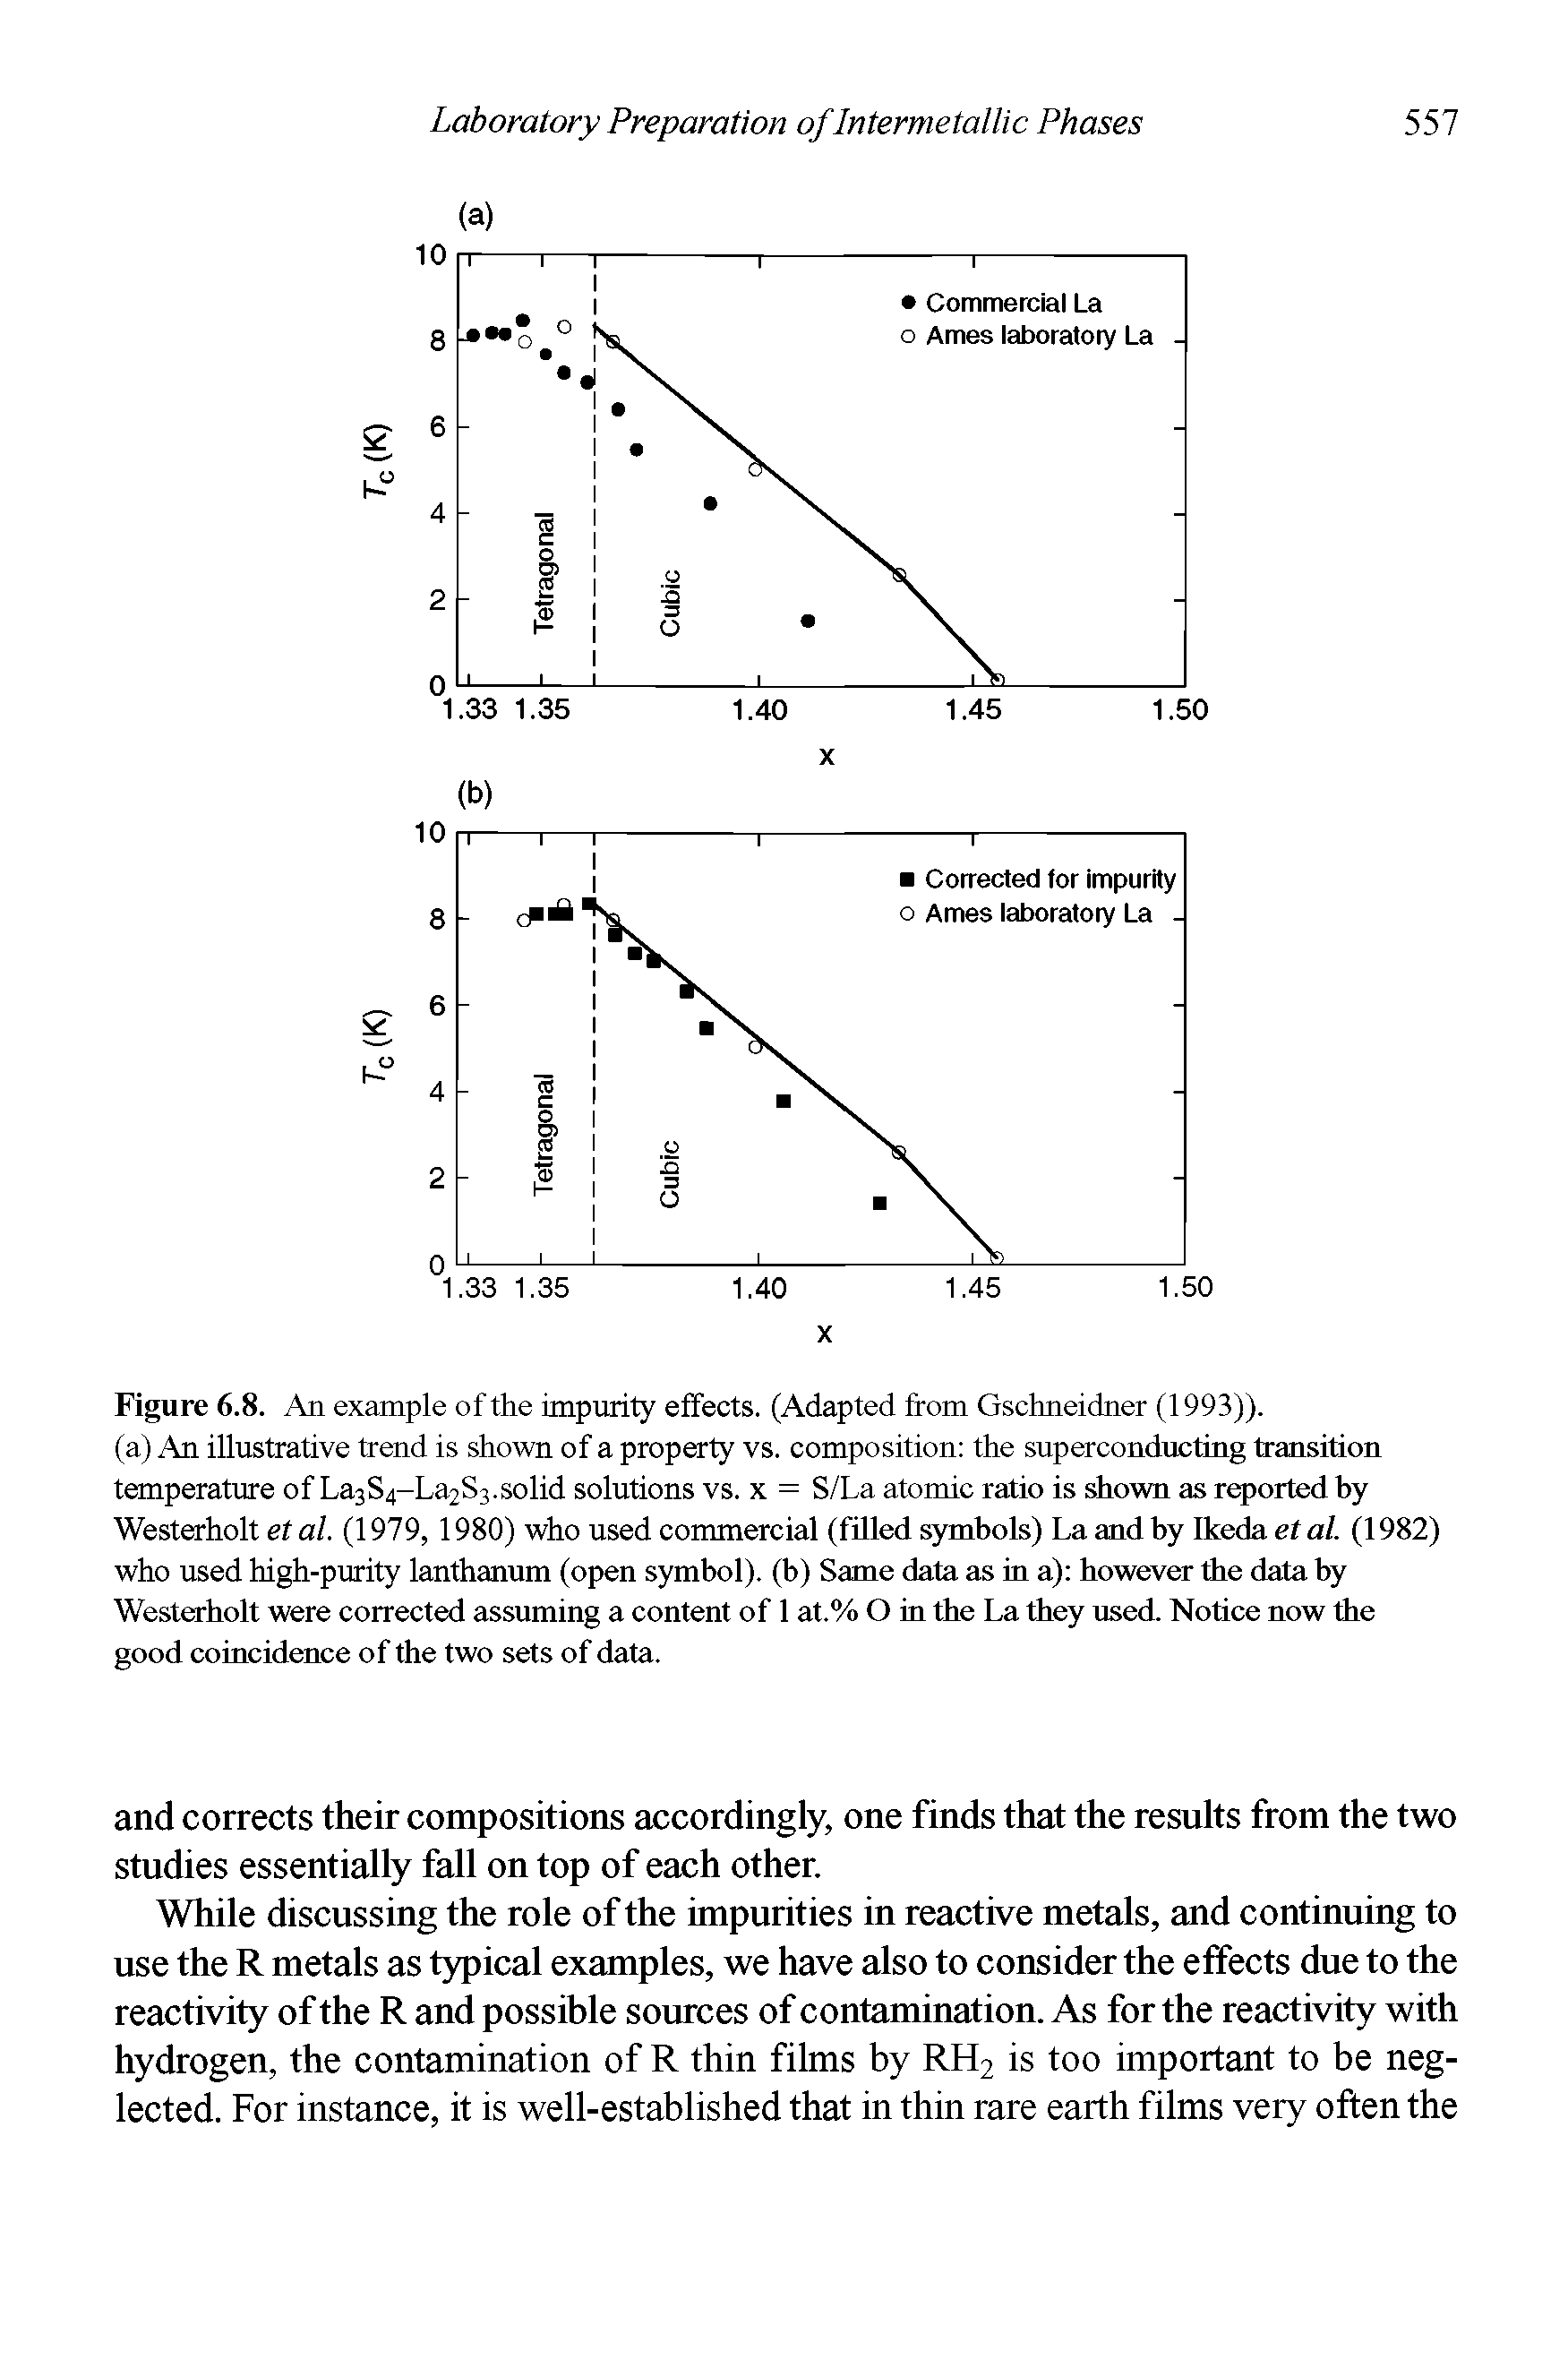 Figure 6.8. An example of the impurity effects. (Adapted from Gschneidner (1993)).